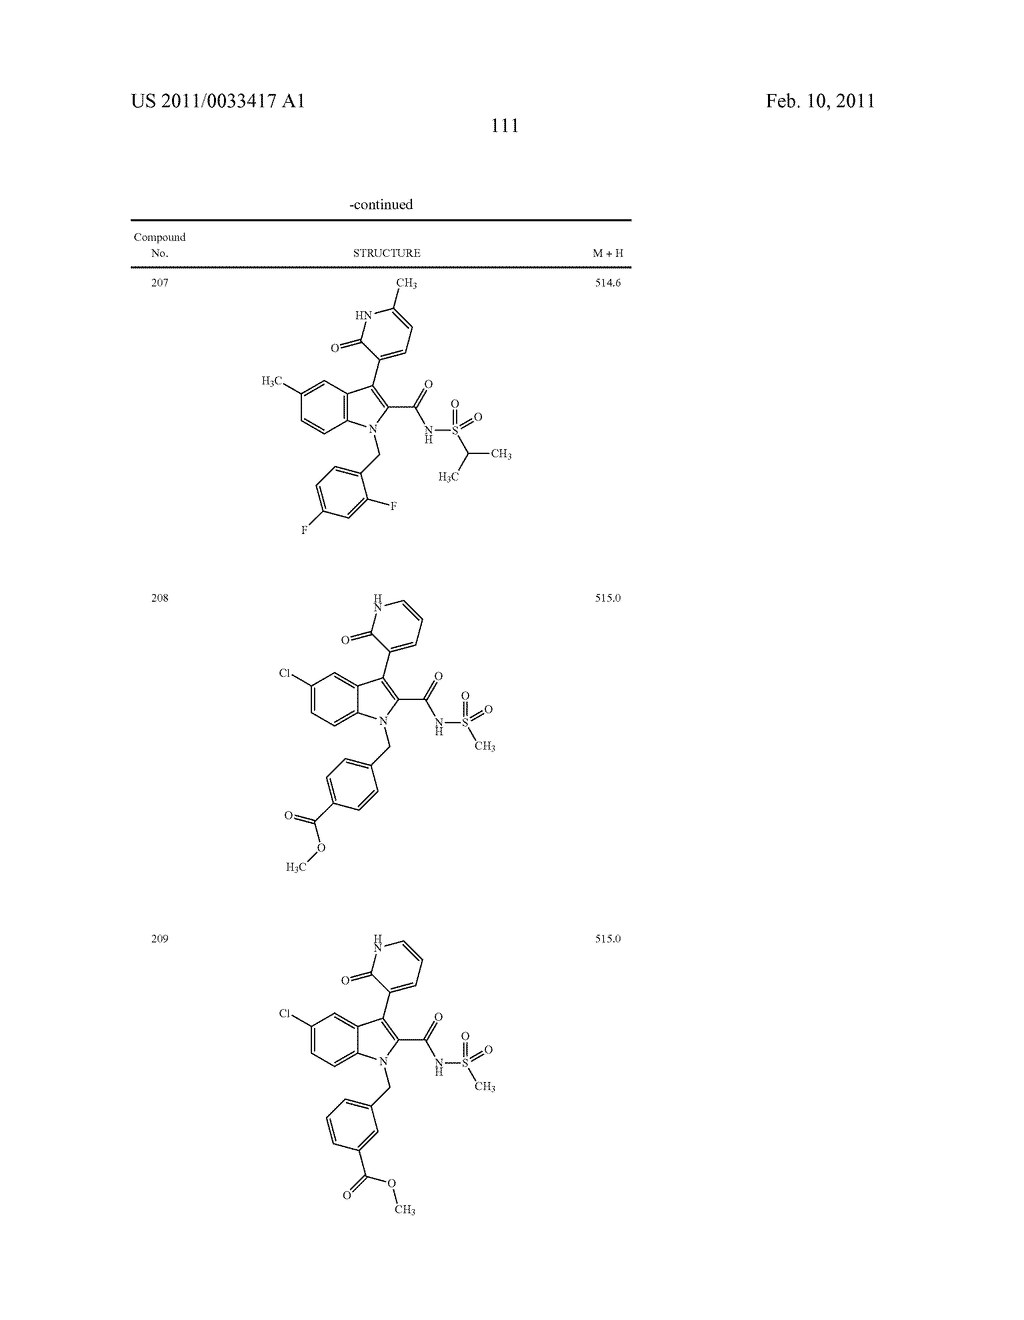 2,3-SUBSTITUTED INDOLE DERIVATIVES FOR TREATING VIRAL INFECTIONS - diagram, schematic, and image 112